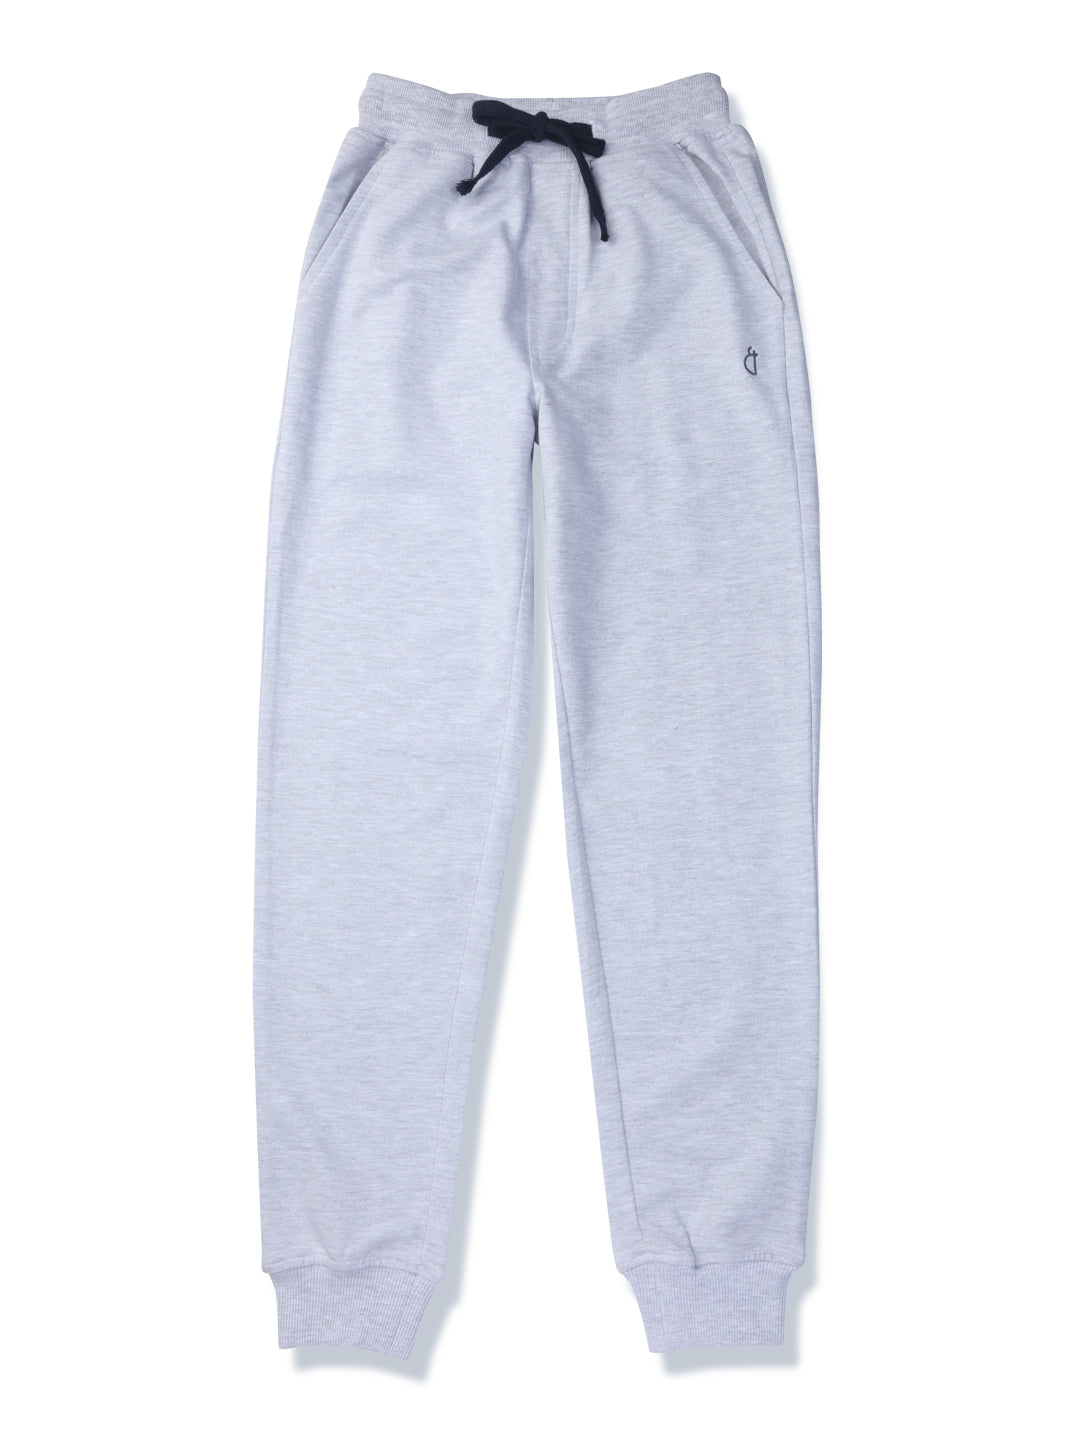 Girls Grey Solid Cotton Track Pant